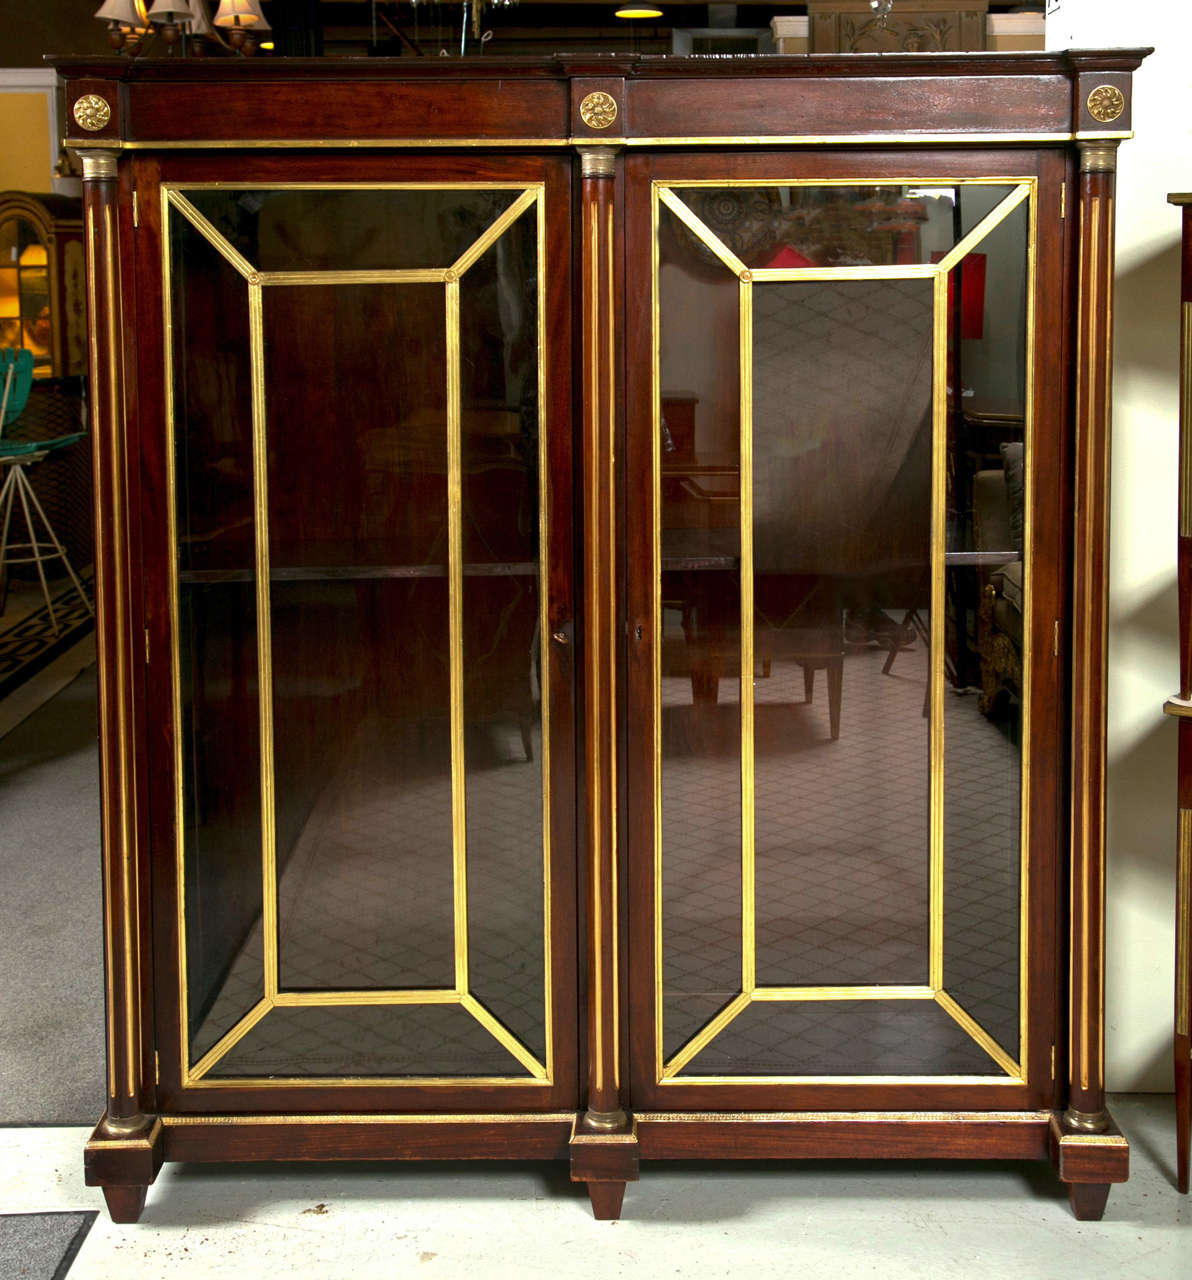 A marvelous early 19th century Russian neoclassical bookcase cabinet. Wonderful gilt metal bronze mounts all over this hand crafted two-door cabinet with a flame mahogany frame. Both doors with decorative framed and boxed bronze mounts flanked by